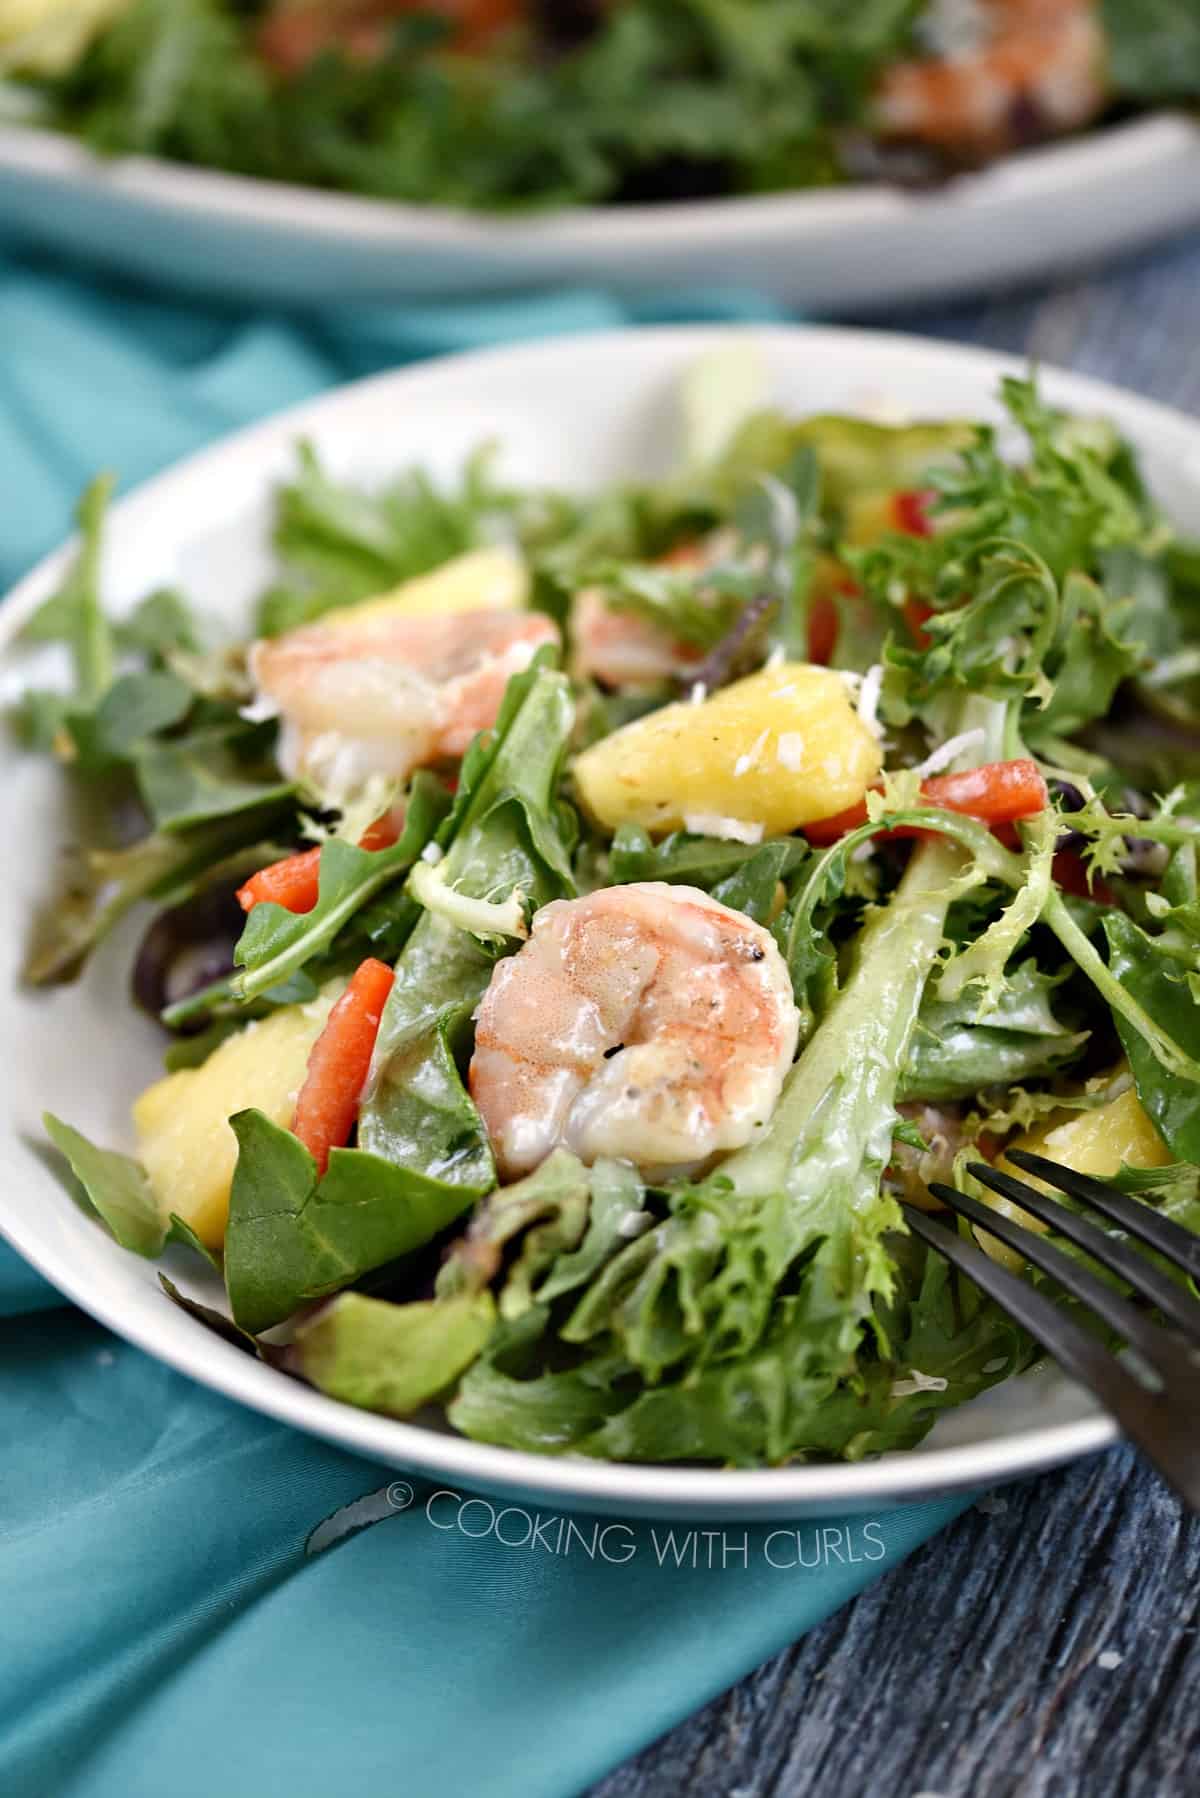 A close up image of a white bowl filled with salad greens, pineapple chunks, pepper strips and grilled shrimp drizzled with pina colada vinaigrette.